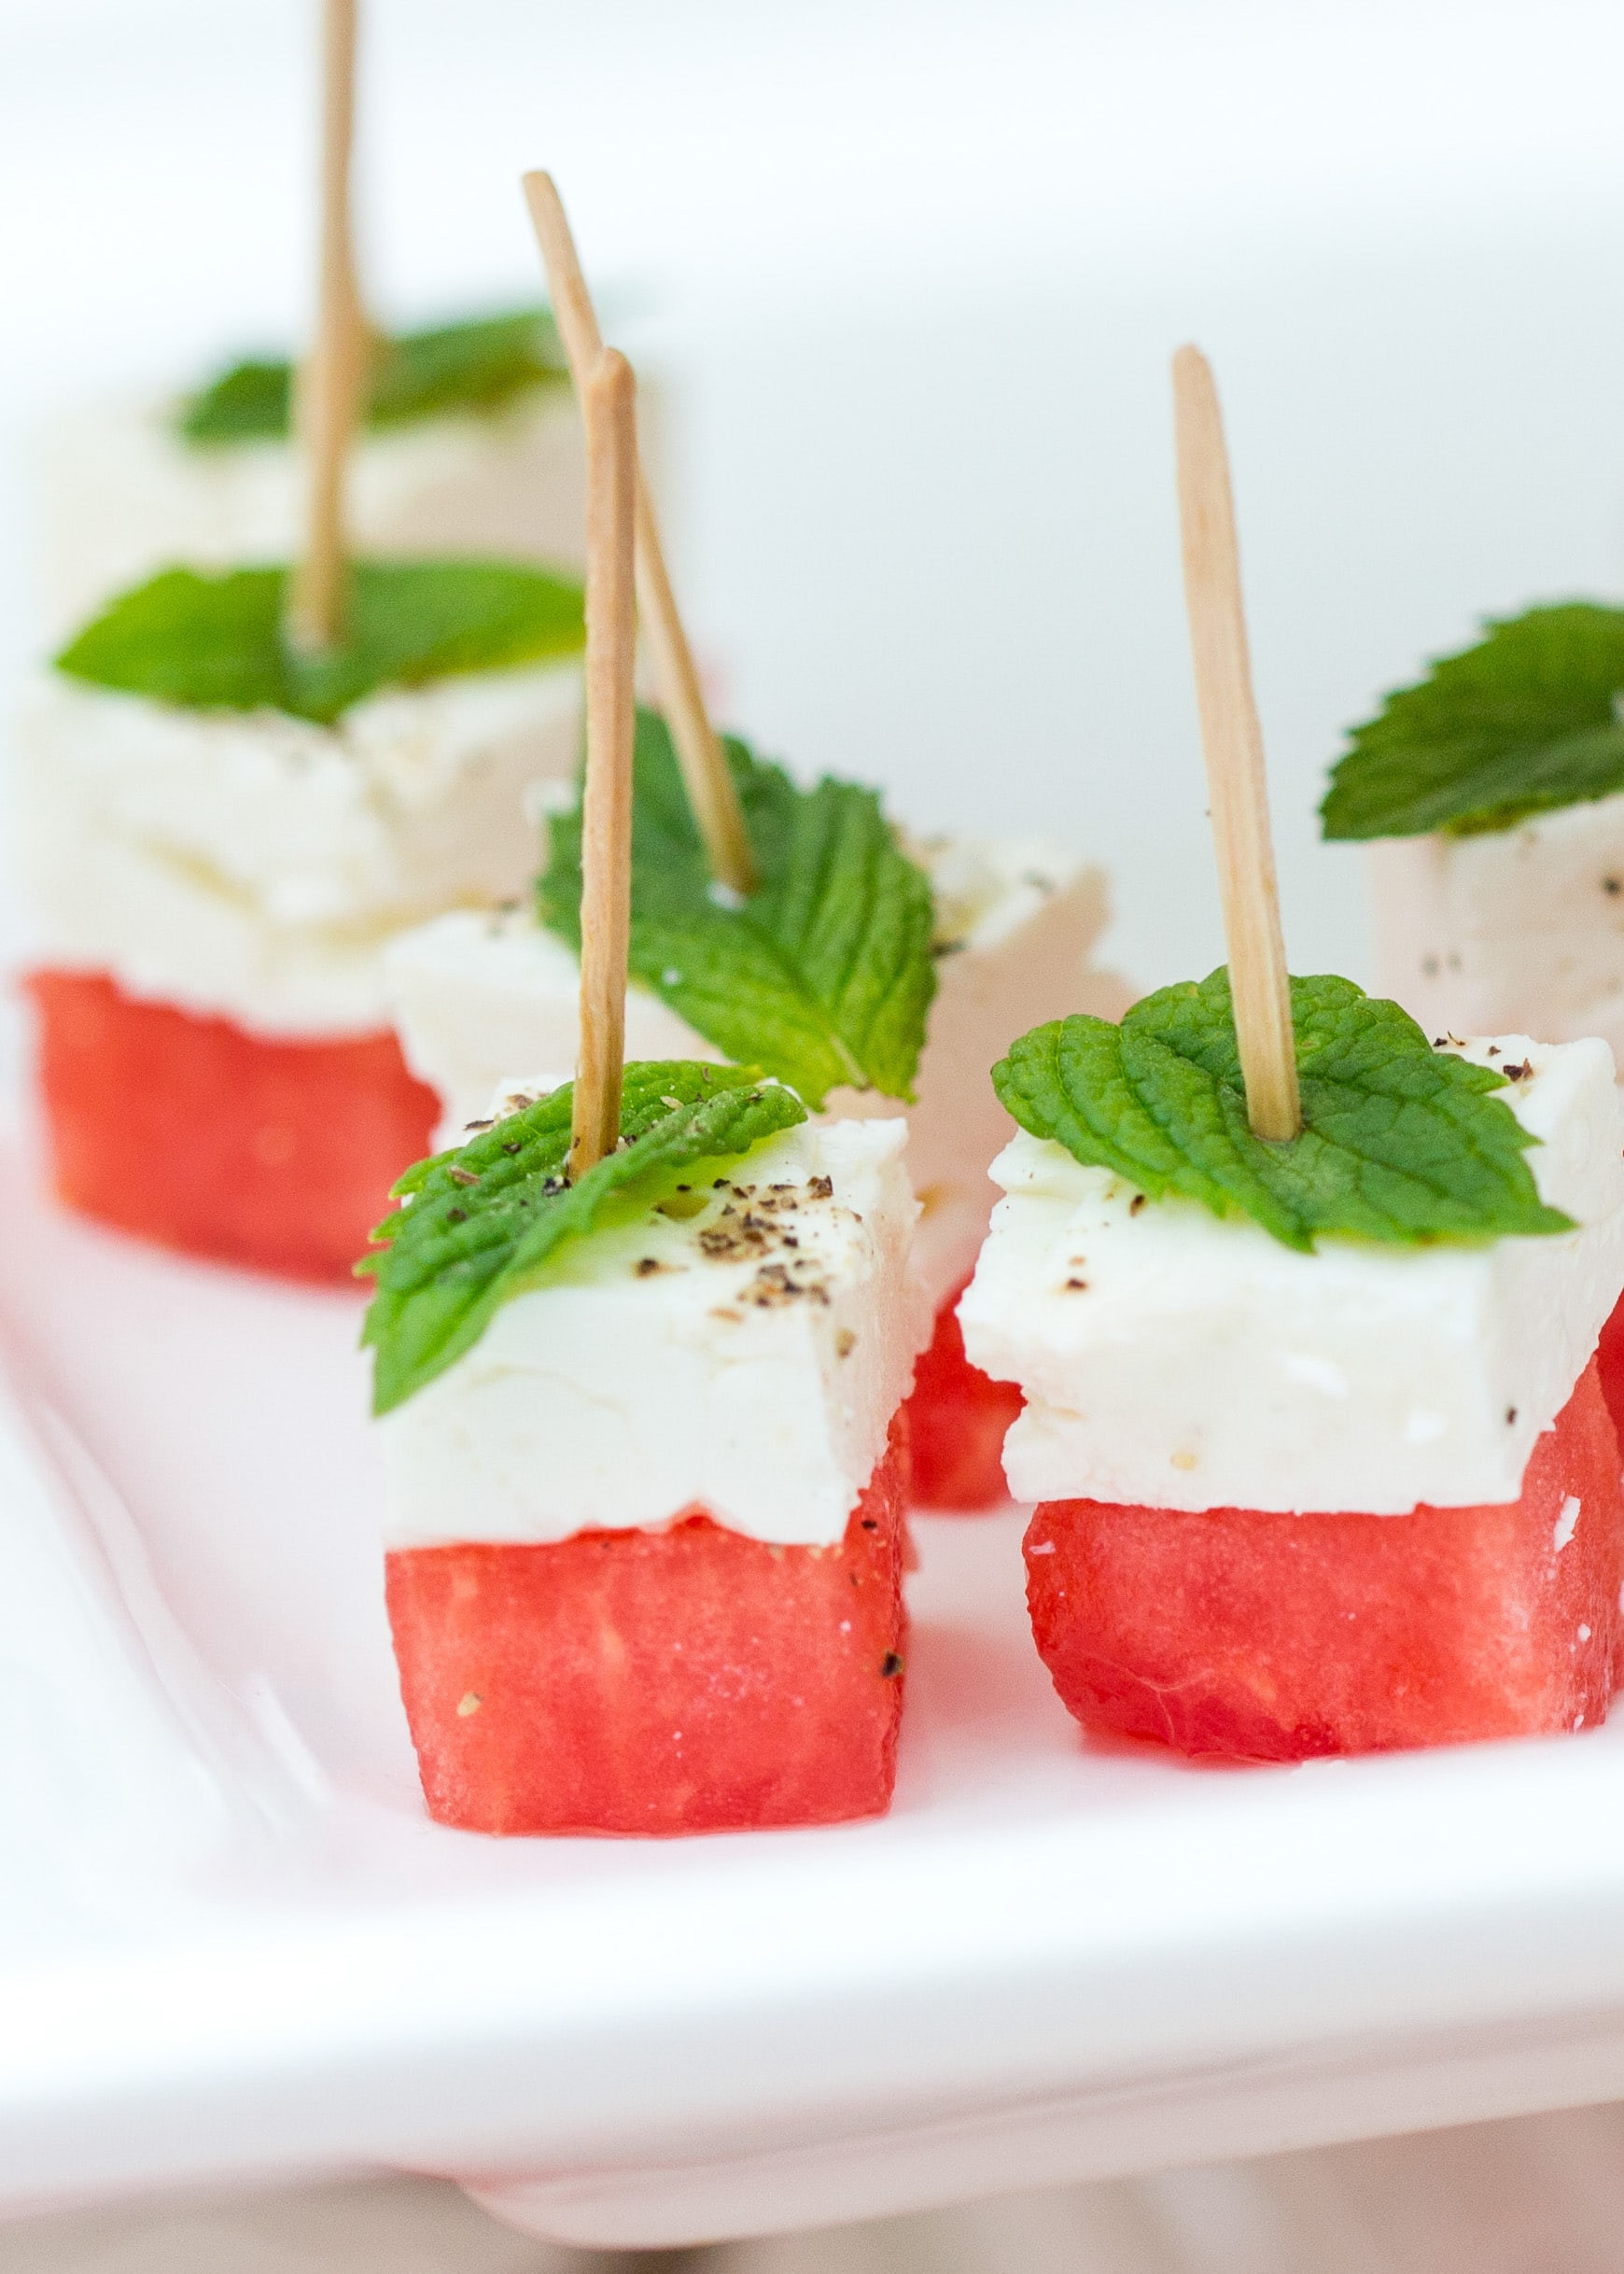 Easy And Healthy Appetizers
 Healthy Summer Appetizers Easy & Delish Pizzazzerie